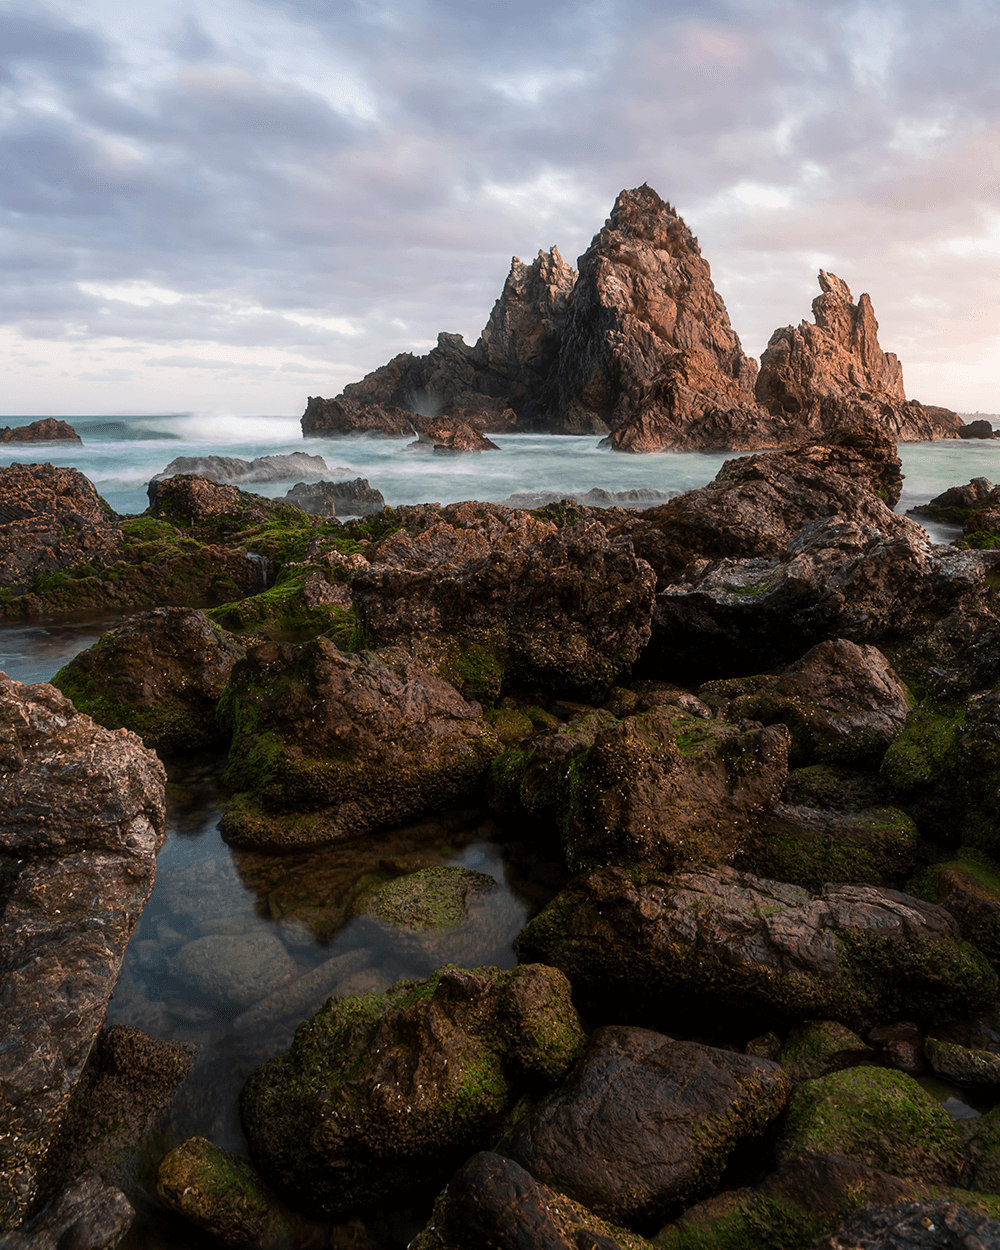 Image of rugged Australian coastlines by @omorfiphotography